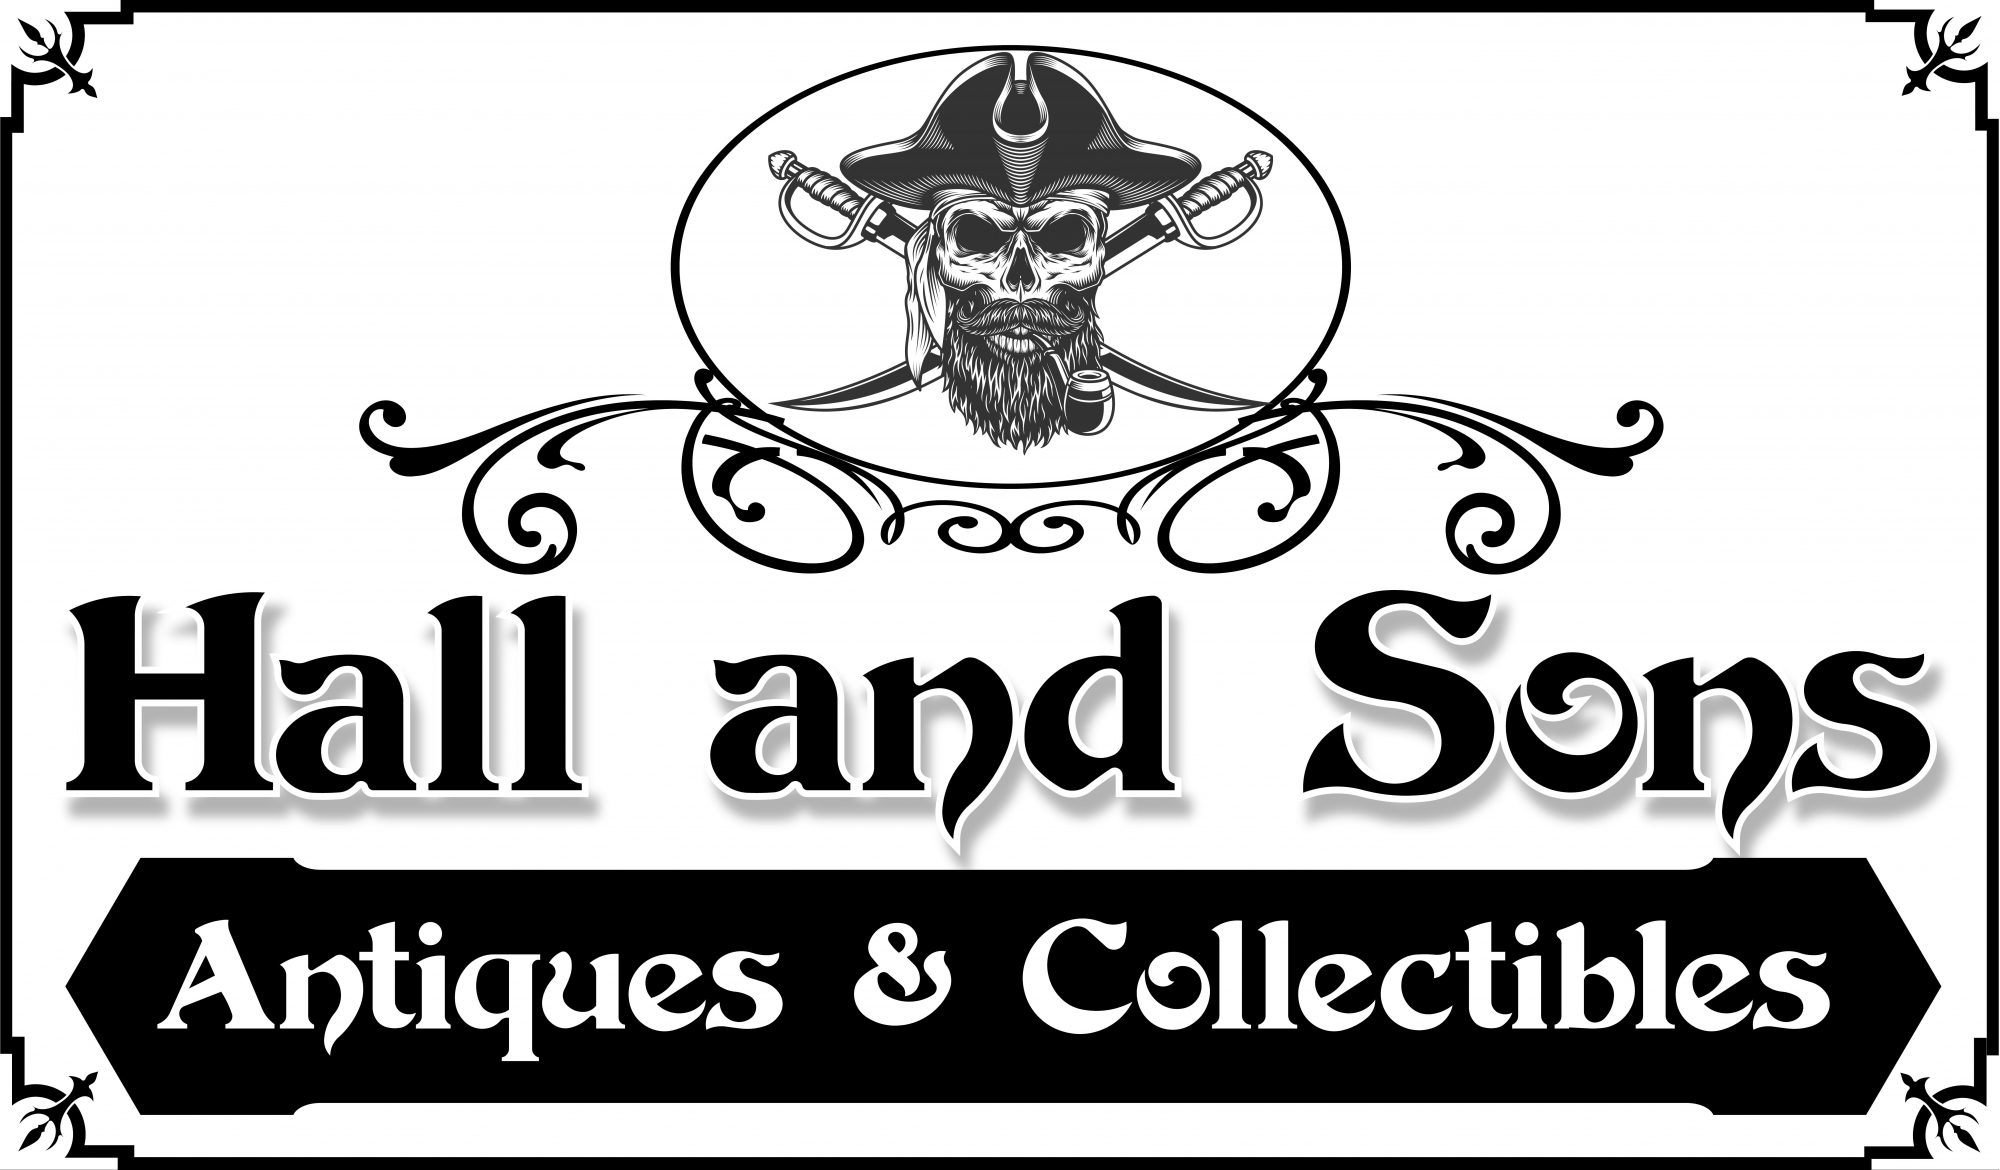 Hall and Sons Antique and Collectibles | AuctionNinja